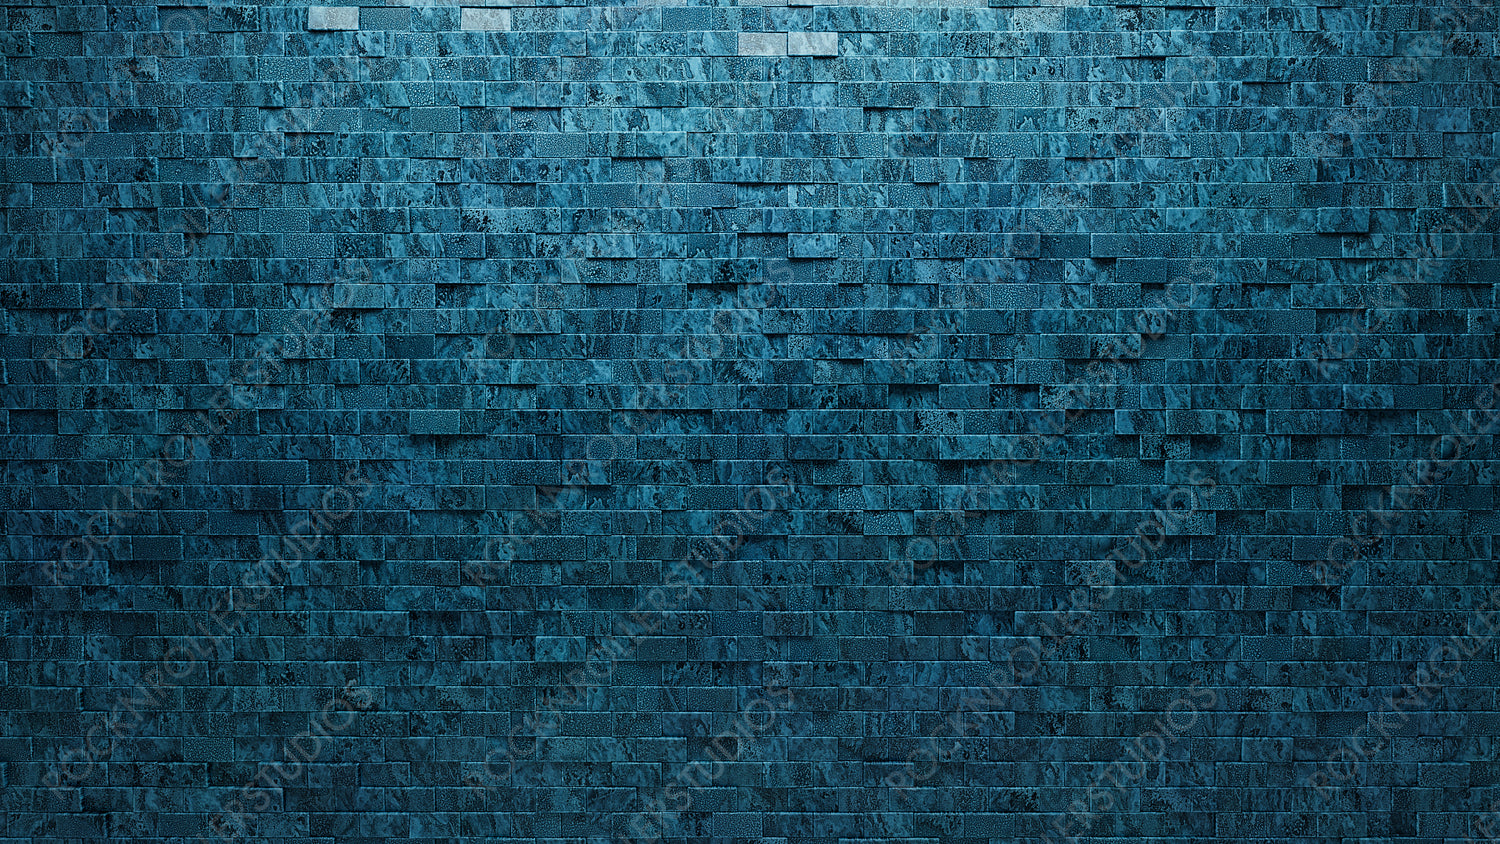 Textured Tiles arranged to create a Rectangular wall. Blue Patina, 3D Background formed from Glazed blocks. 3D Render